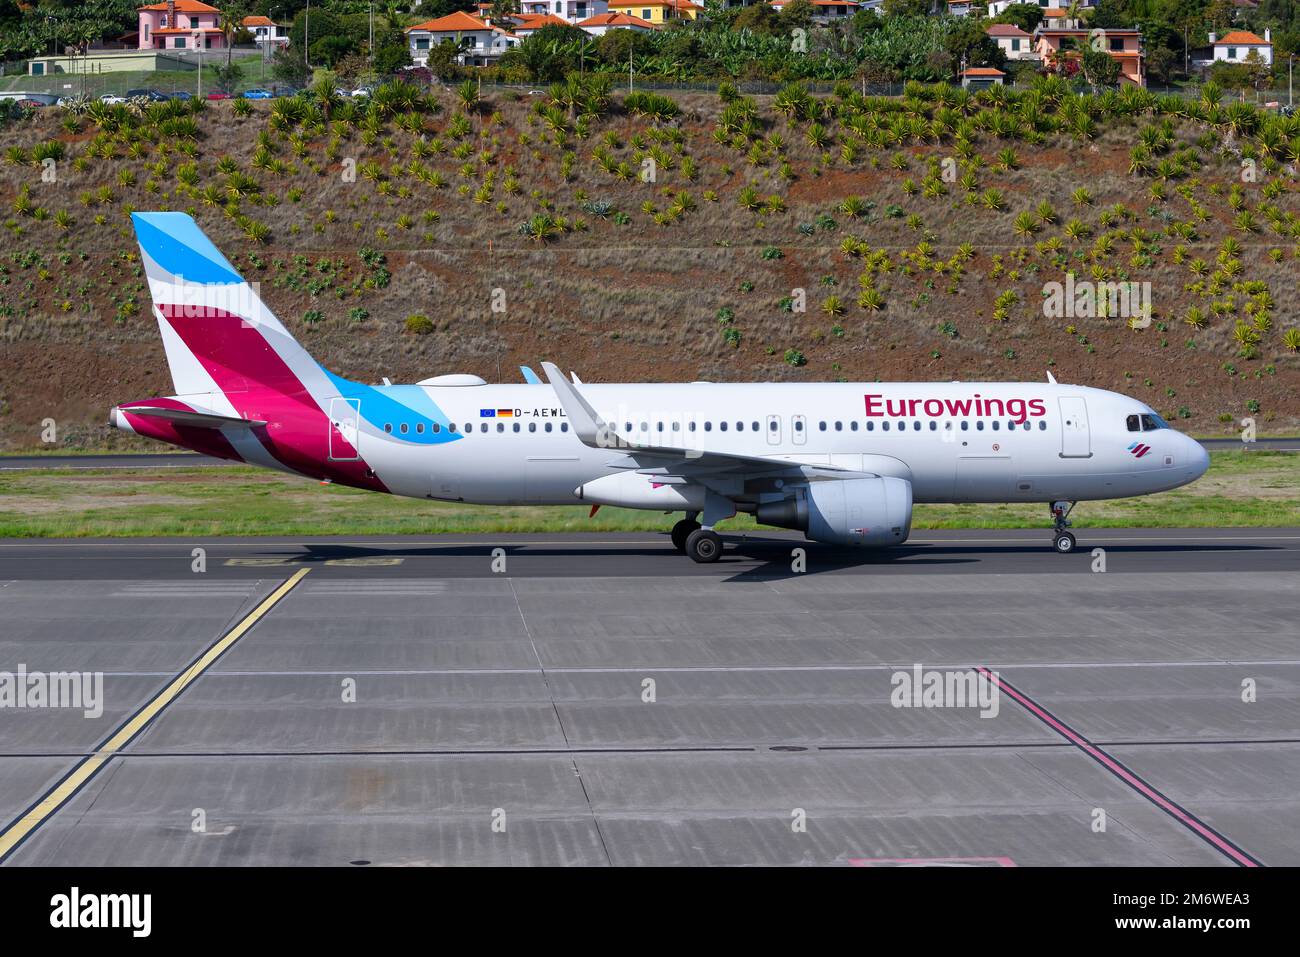 Eurowings Airbus A320 aircraft taxiing. Airplane A320 of EuroWings airline. Plane registered as D-AEWL. Stock Photo